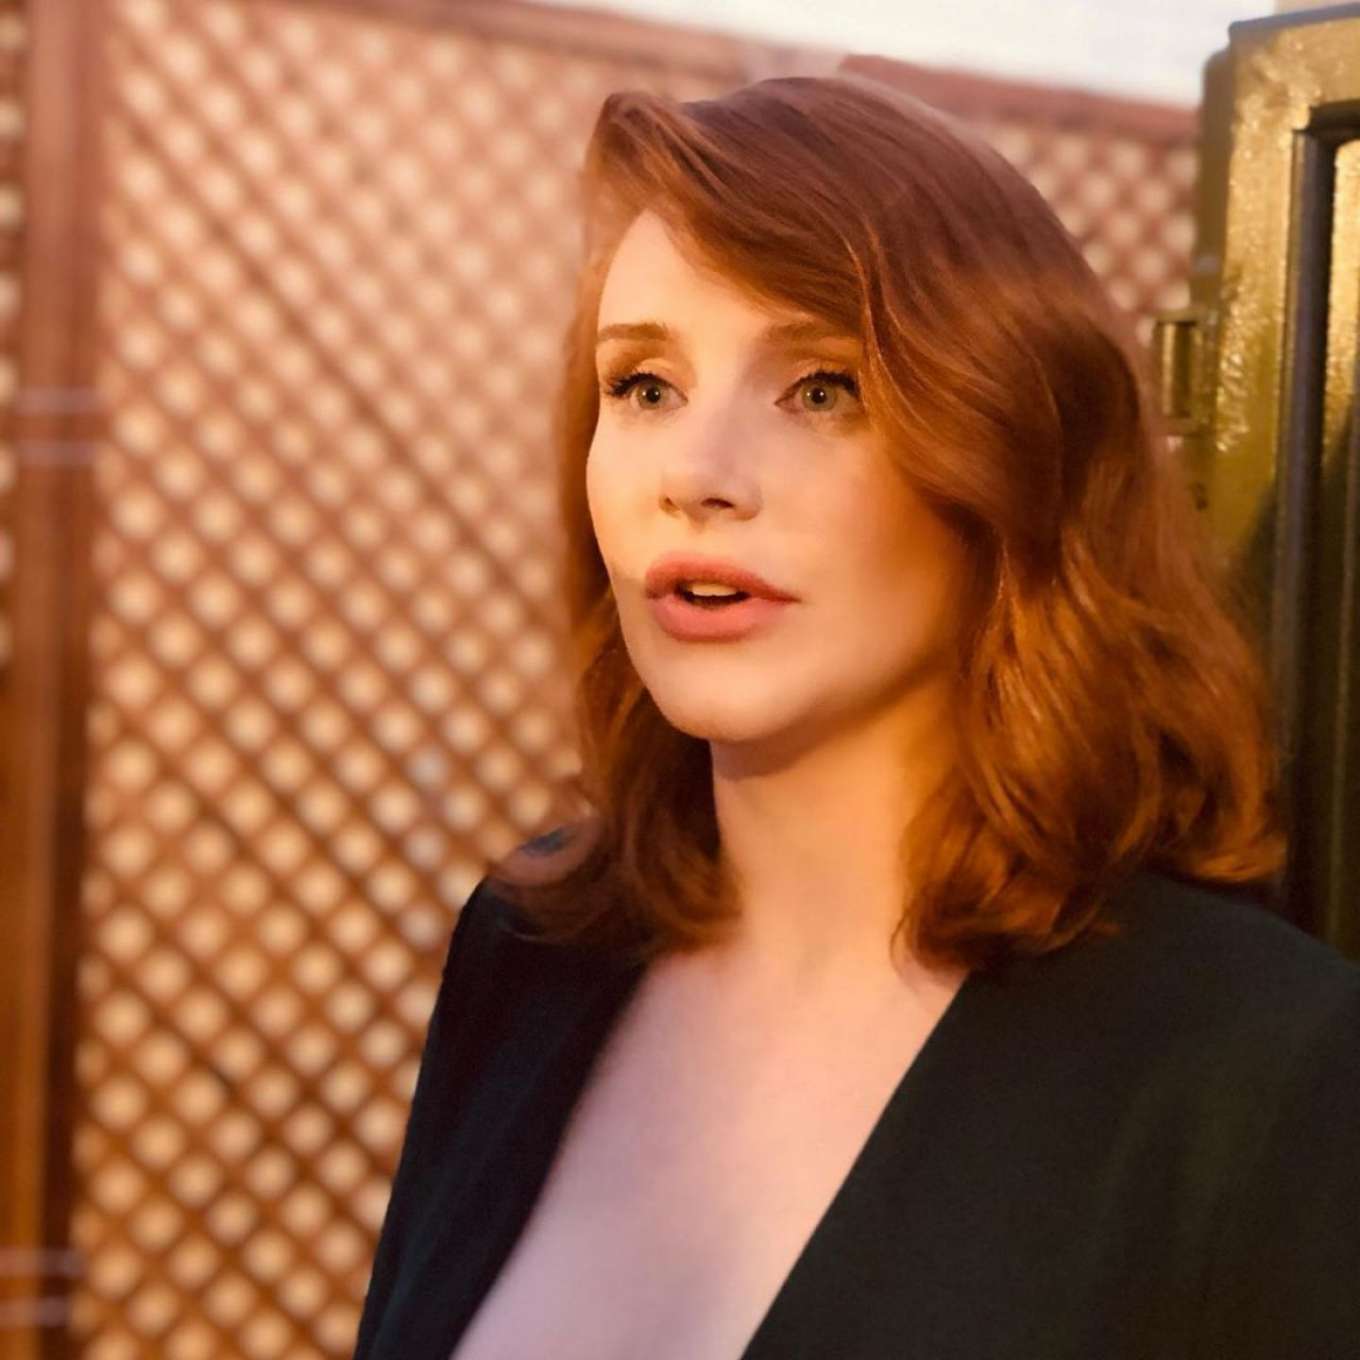 Bryce Dallas Howard â€“ Portraits for Grand Celebration Opening of Jurassic World: The Ride 2019